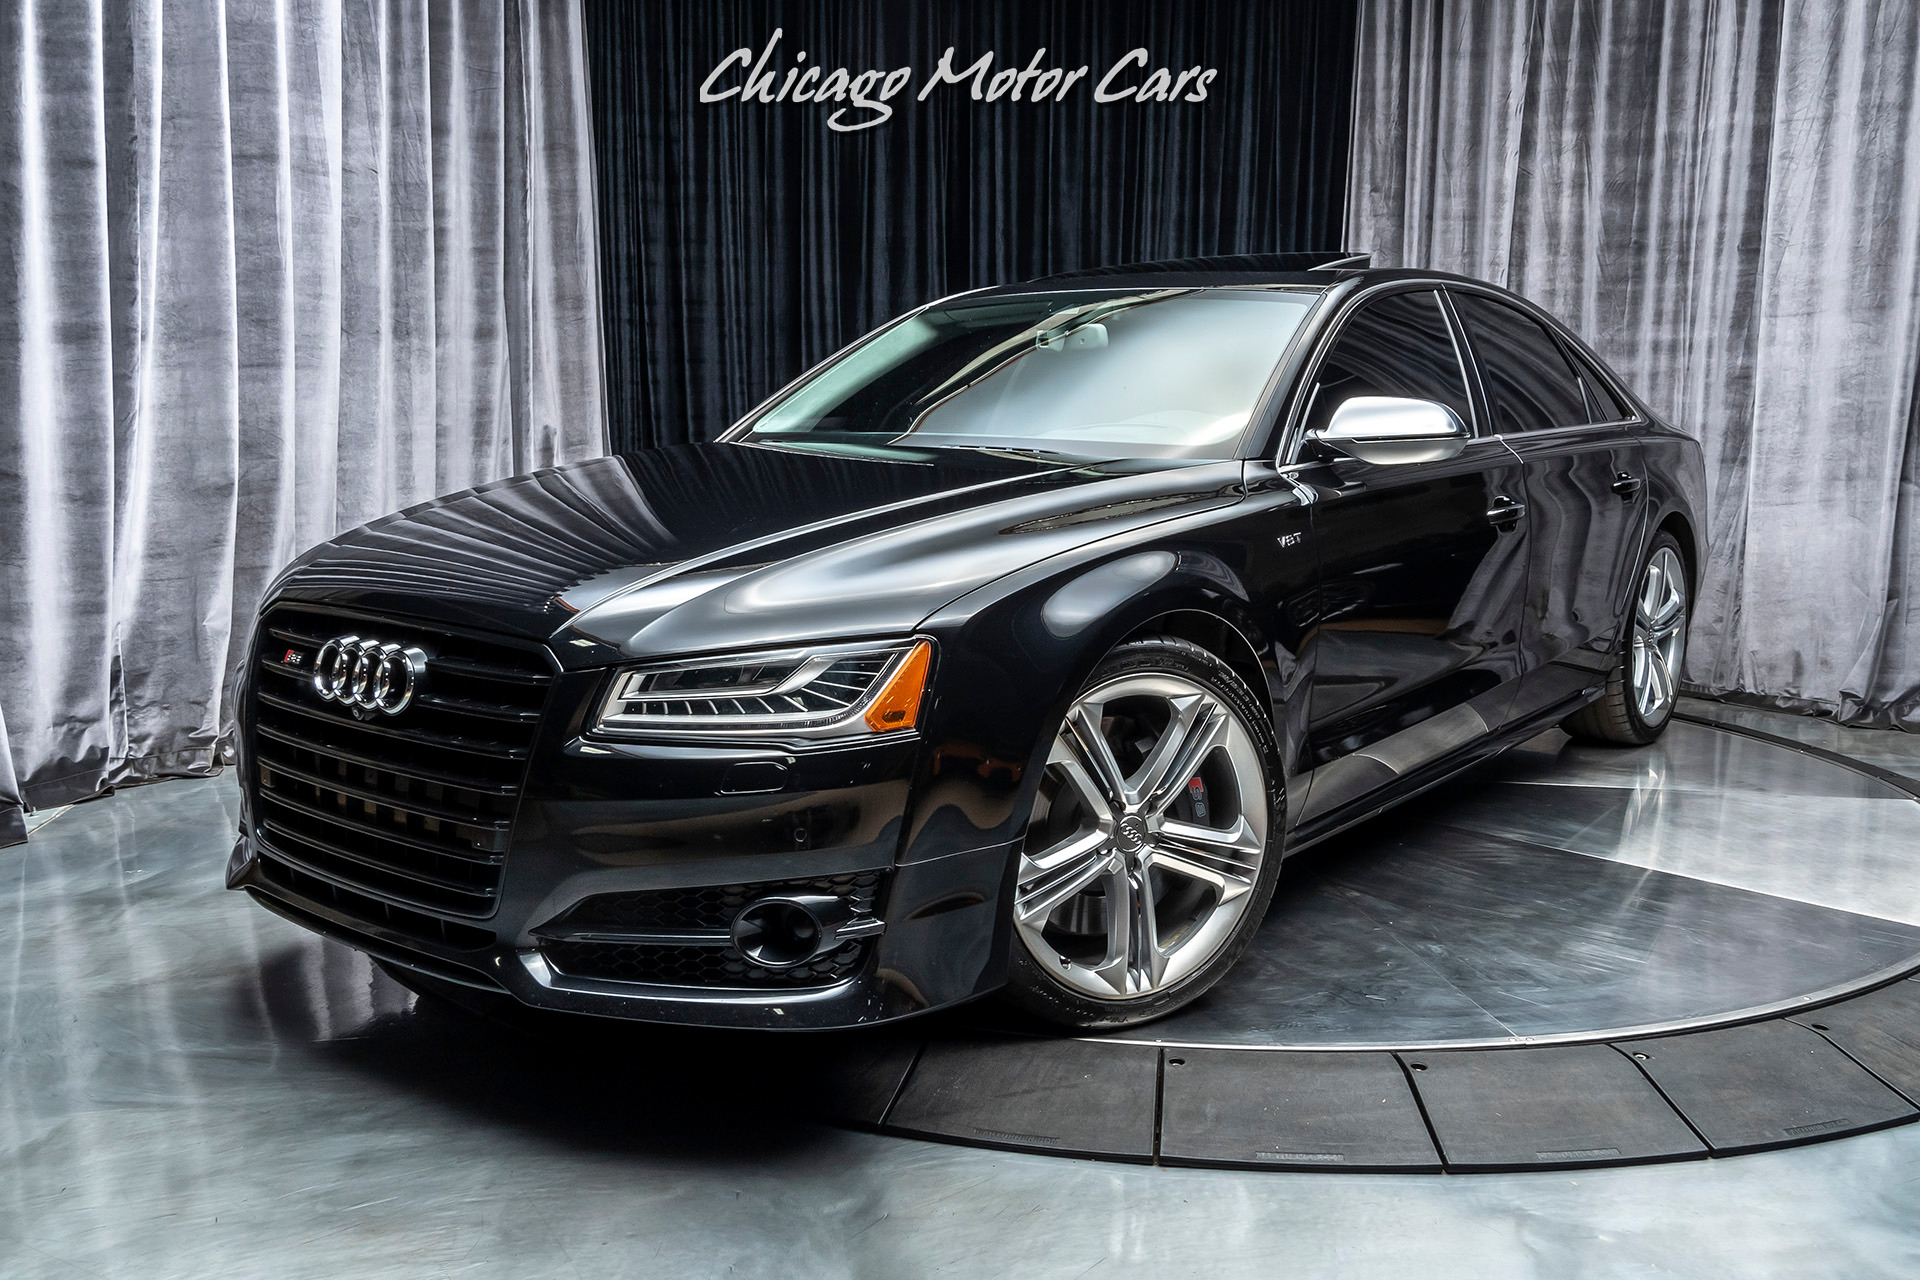 Used 2015 Audi S8 4.0T Quattro Sedan MSRP $119K+ DRIVER ASSISTANCE PACKAGE!  For Sale (Special Pricing) | Chicago Motor Cars Stock #16357